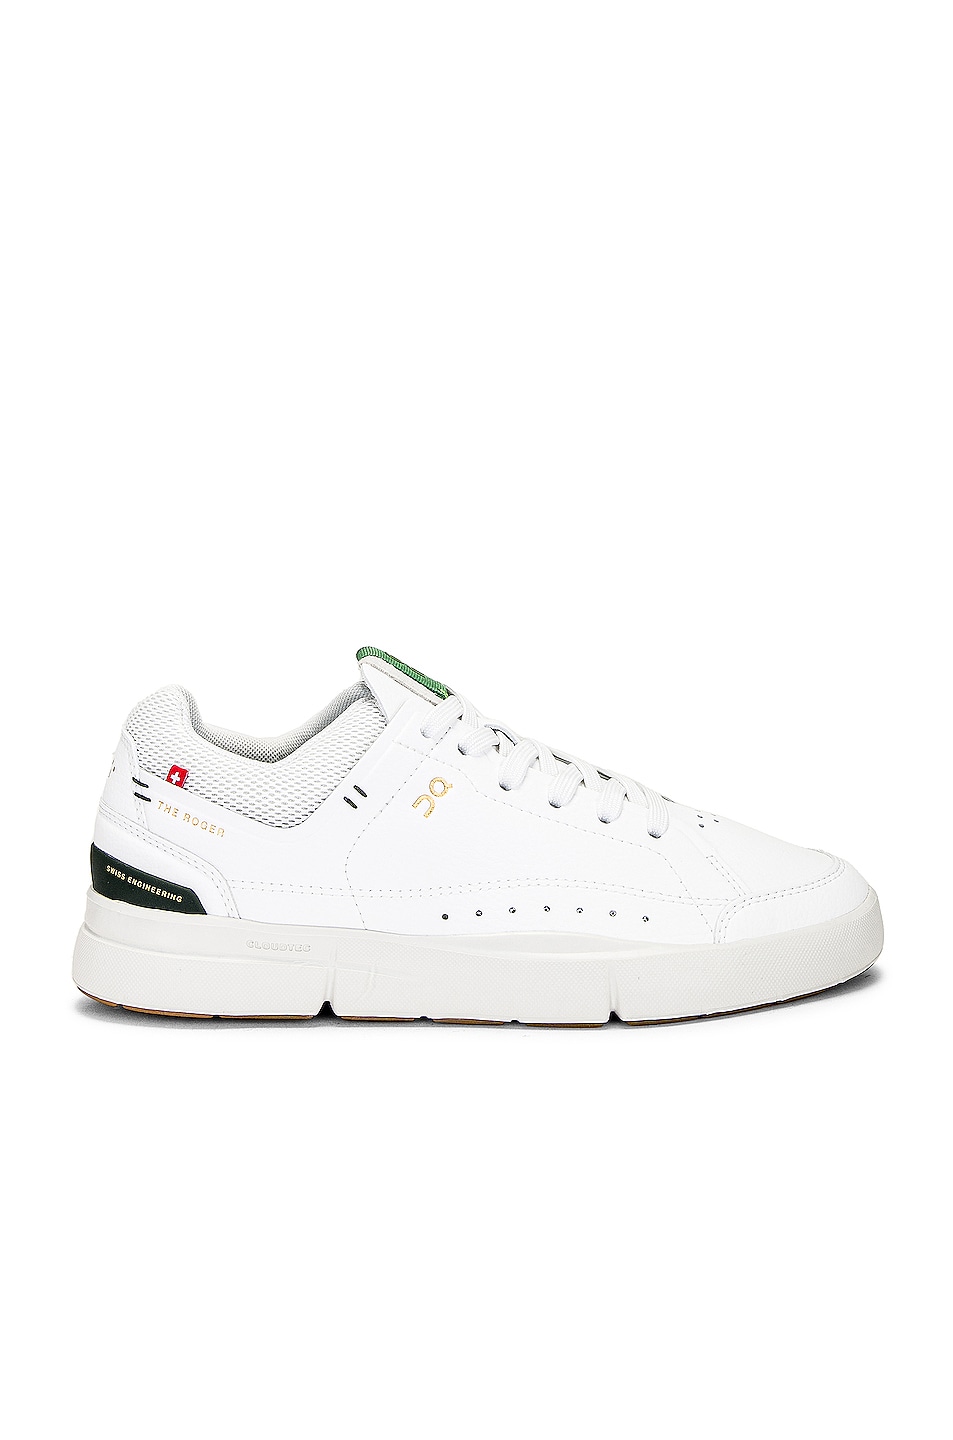 Image 1 of On Roger Centre Court Sneaker in White & Sage